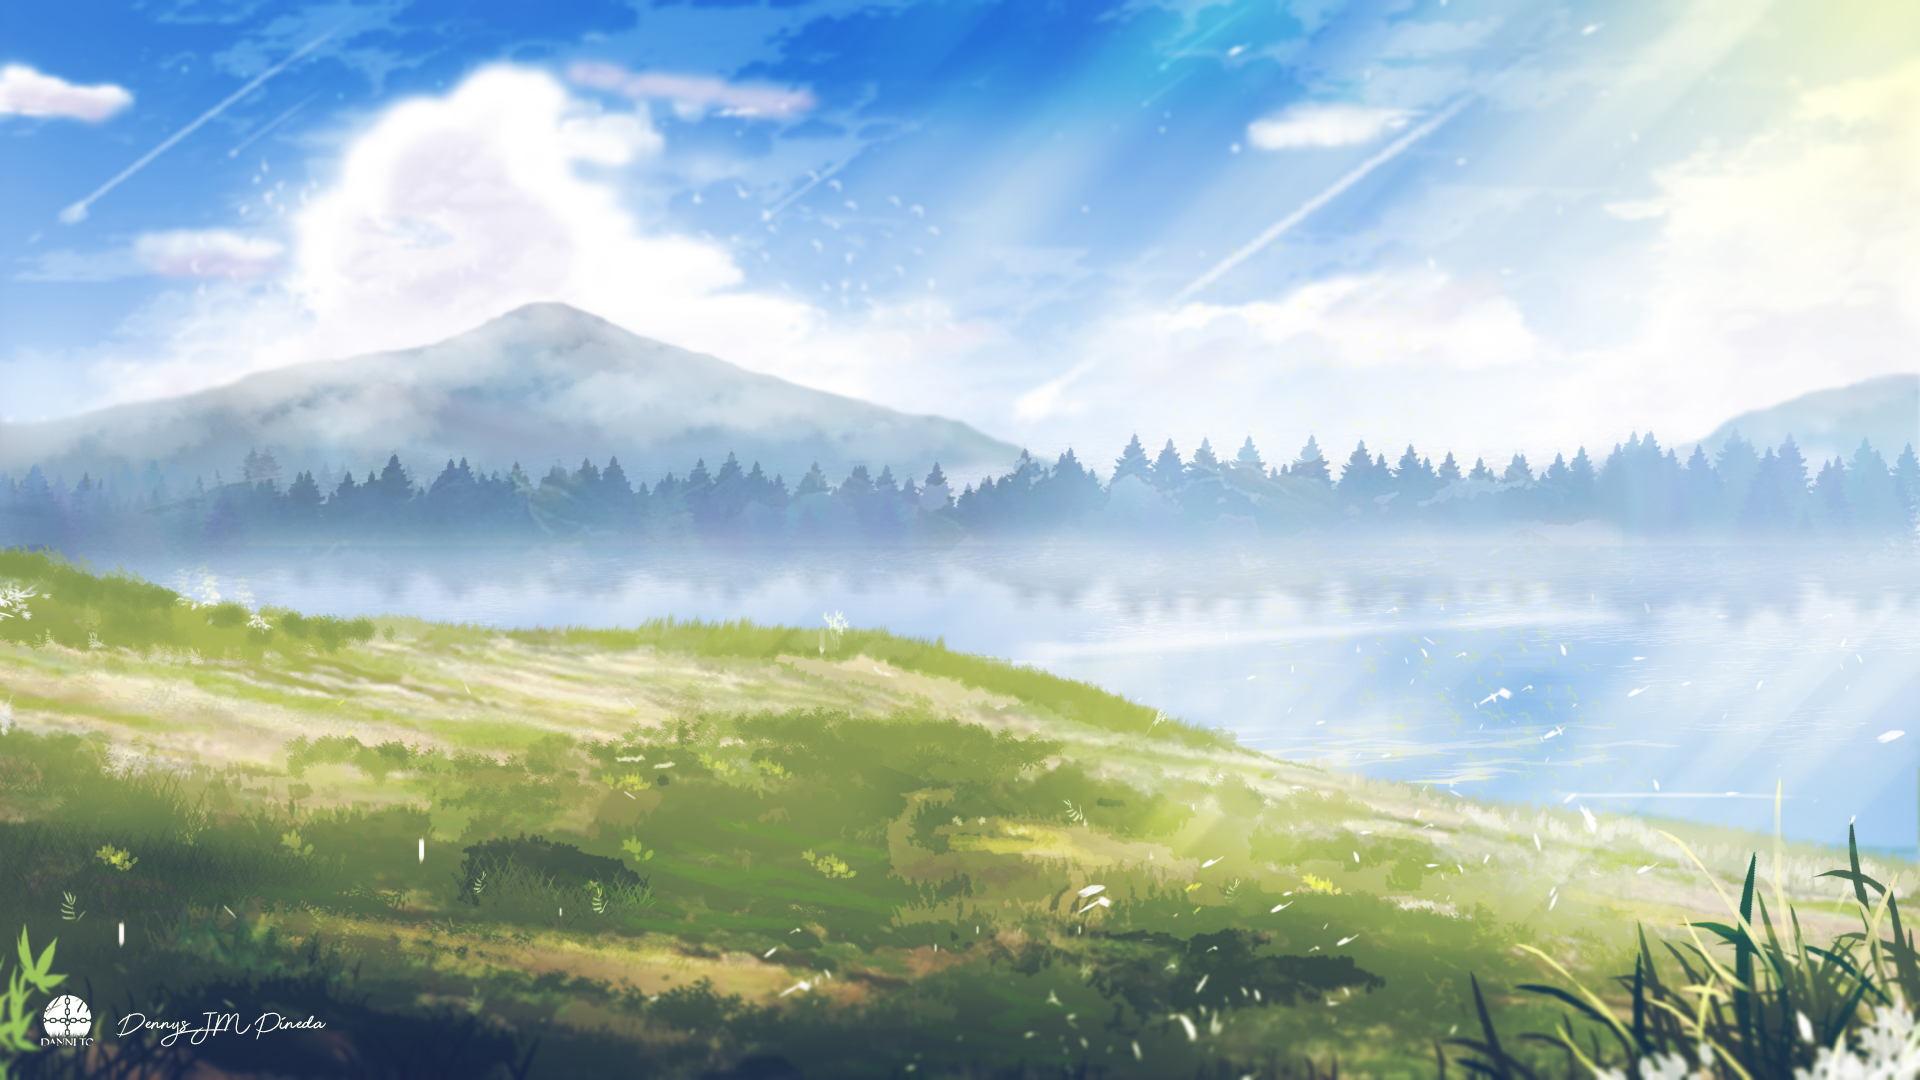 Anime Background by Dannitolvl on DeviantArt